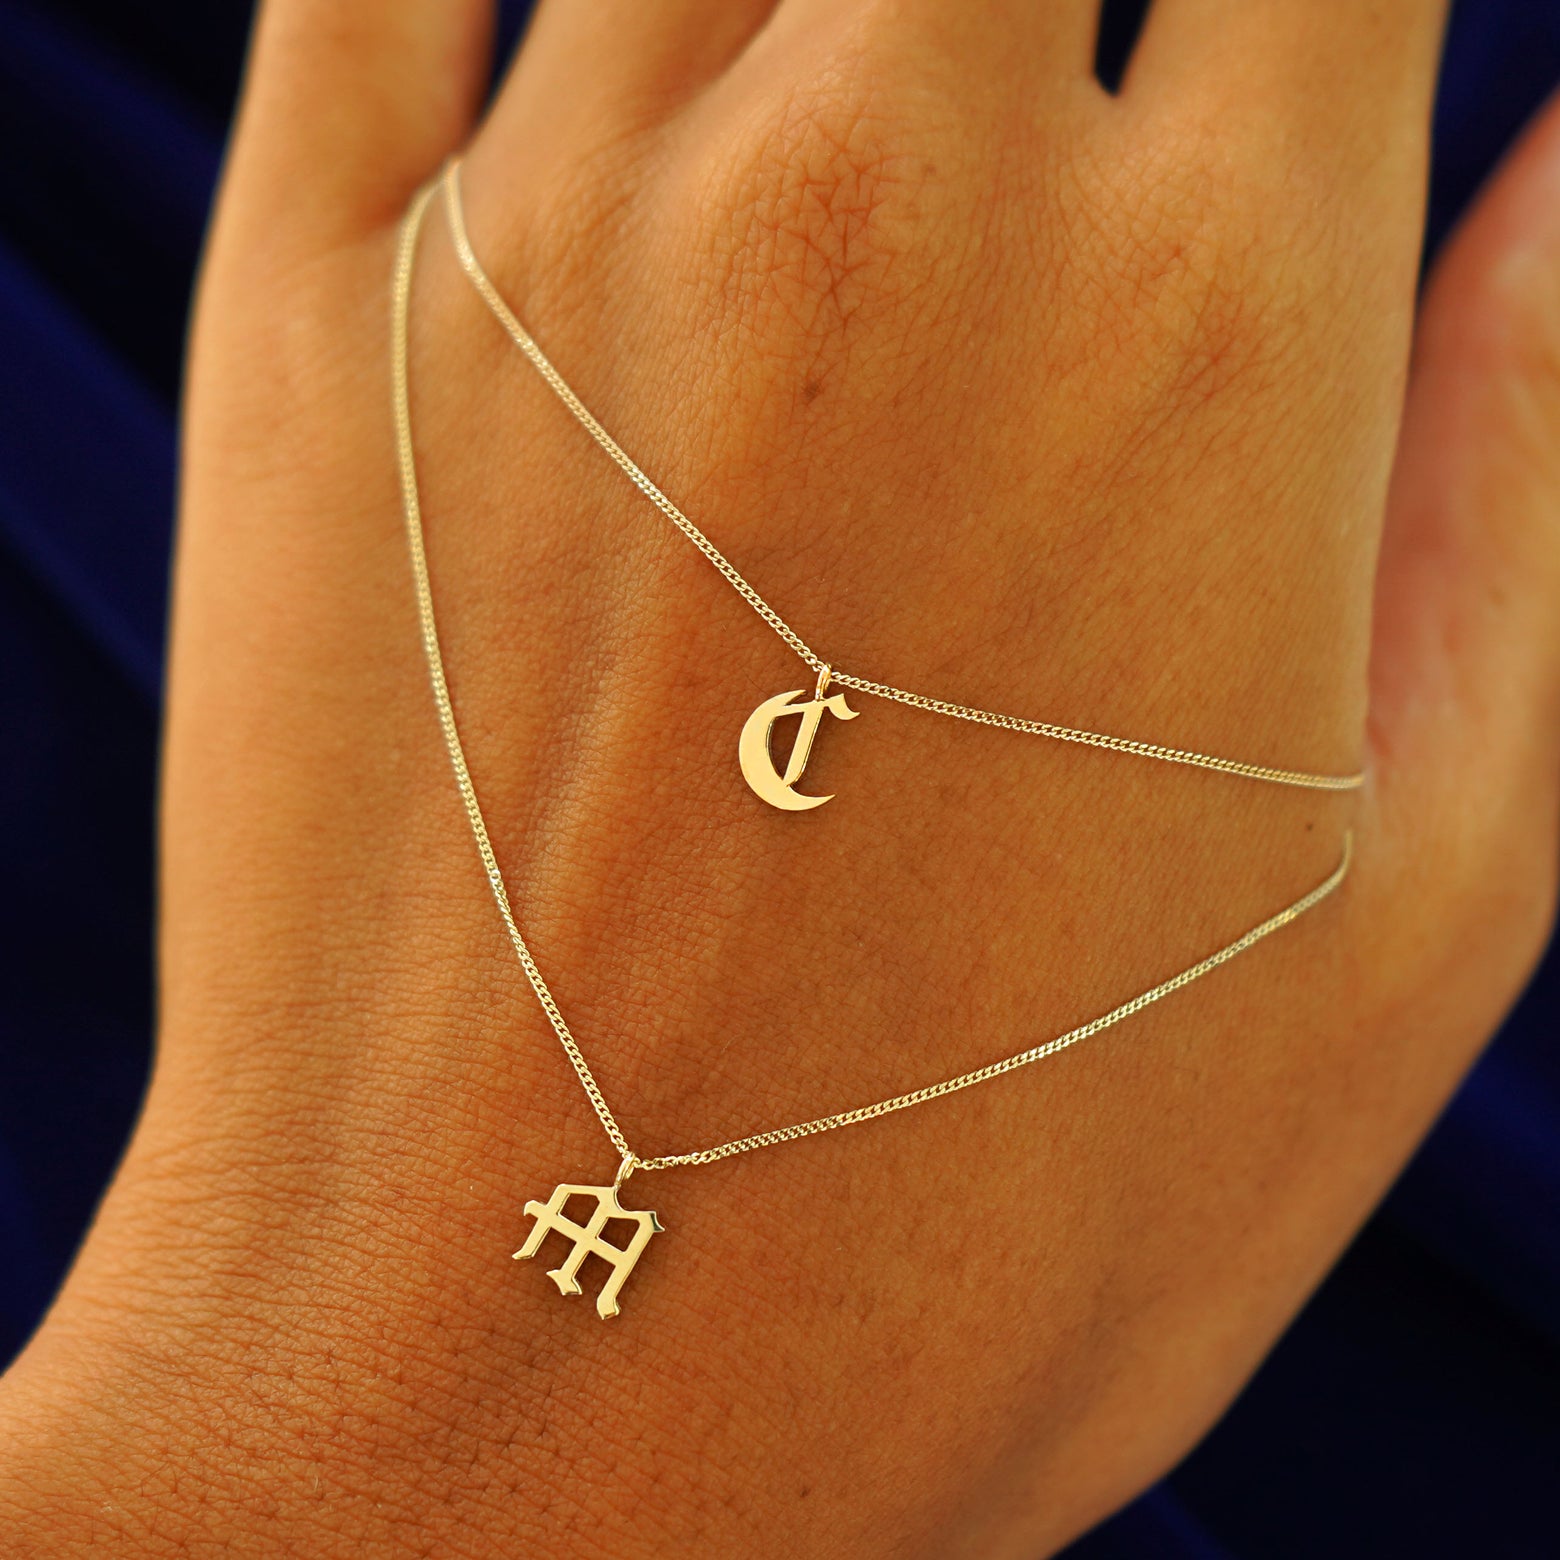 Twonitial Charm Necklaces with the letters C and M draped across the back of a model's hand